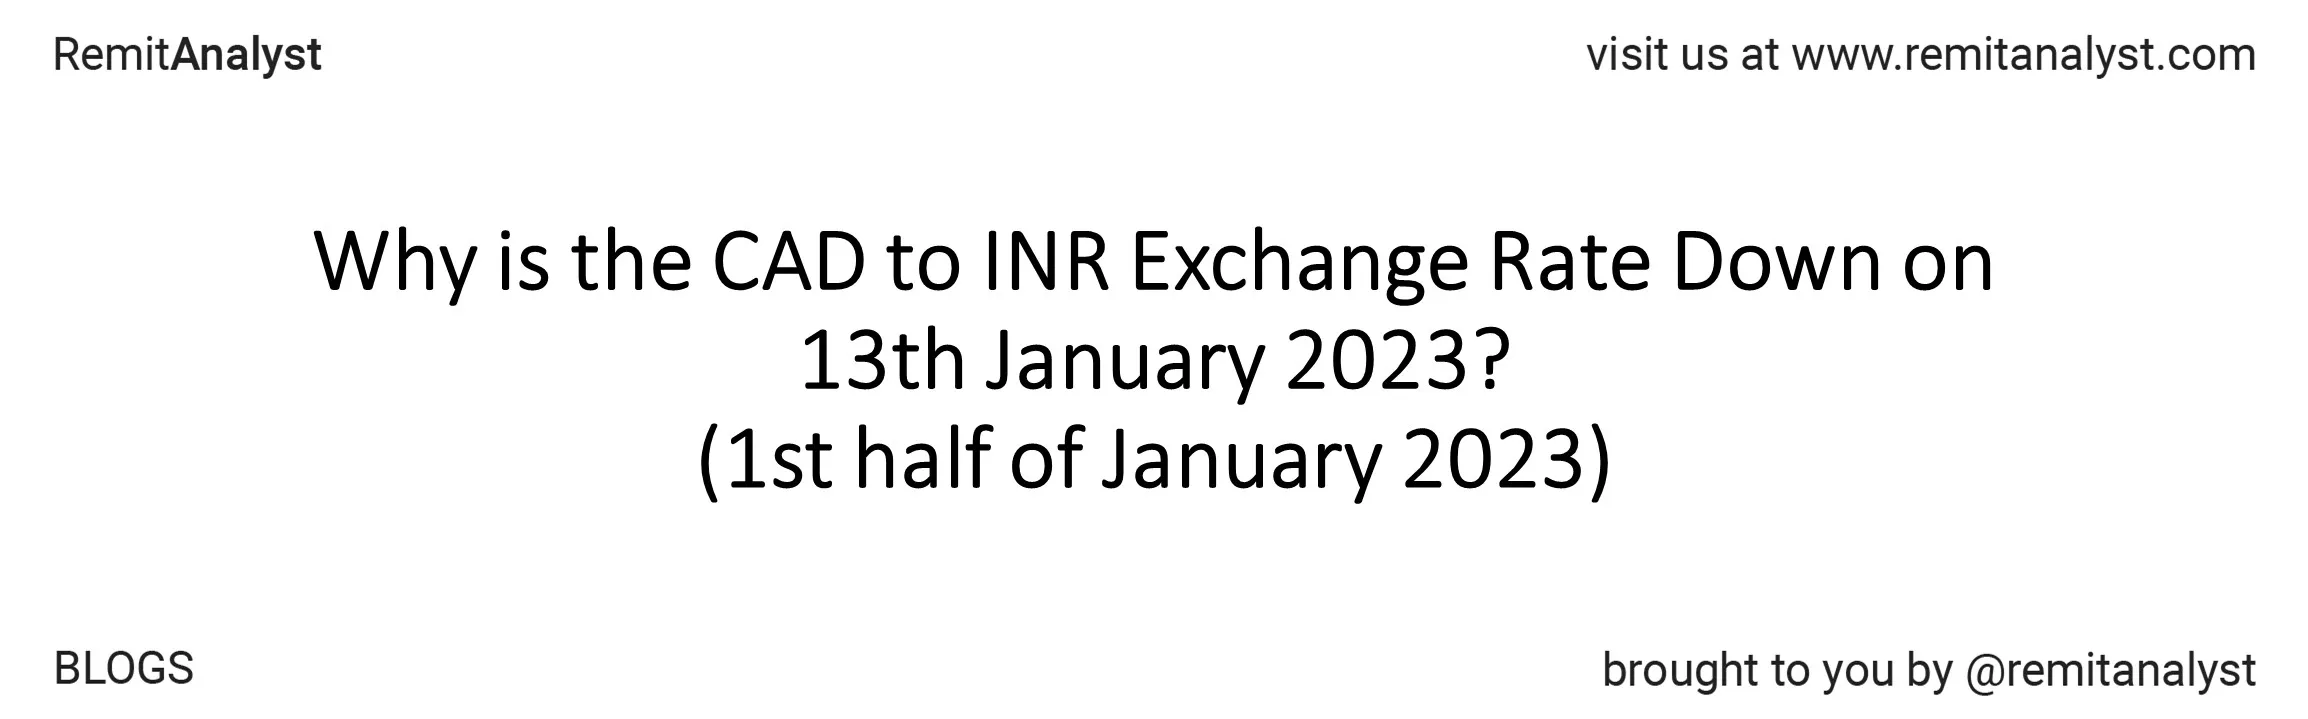 cad-to-inr-exchange-rate-from-2-jan-2023-to-13-jan-2023-title